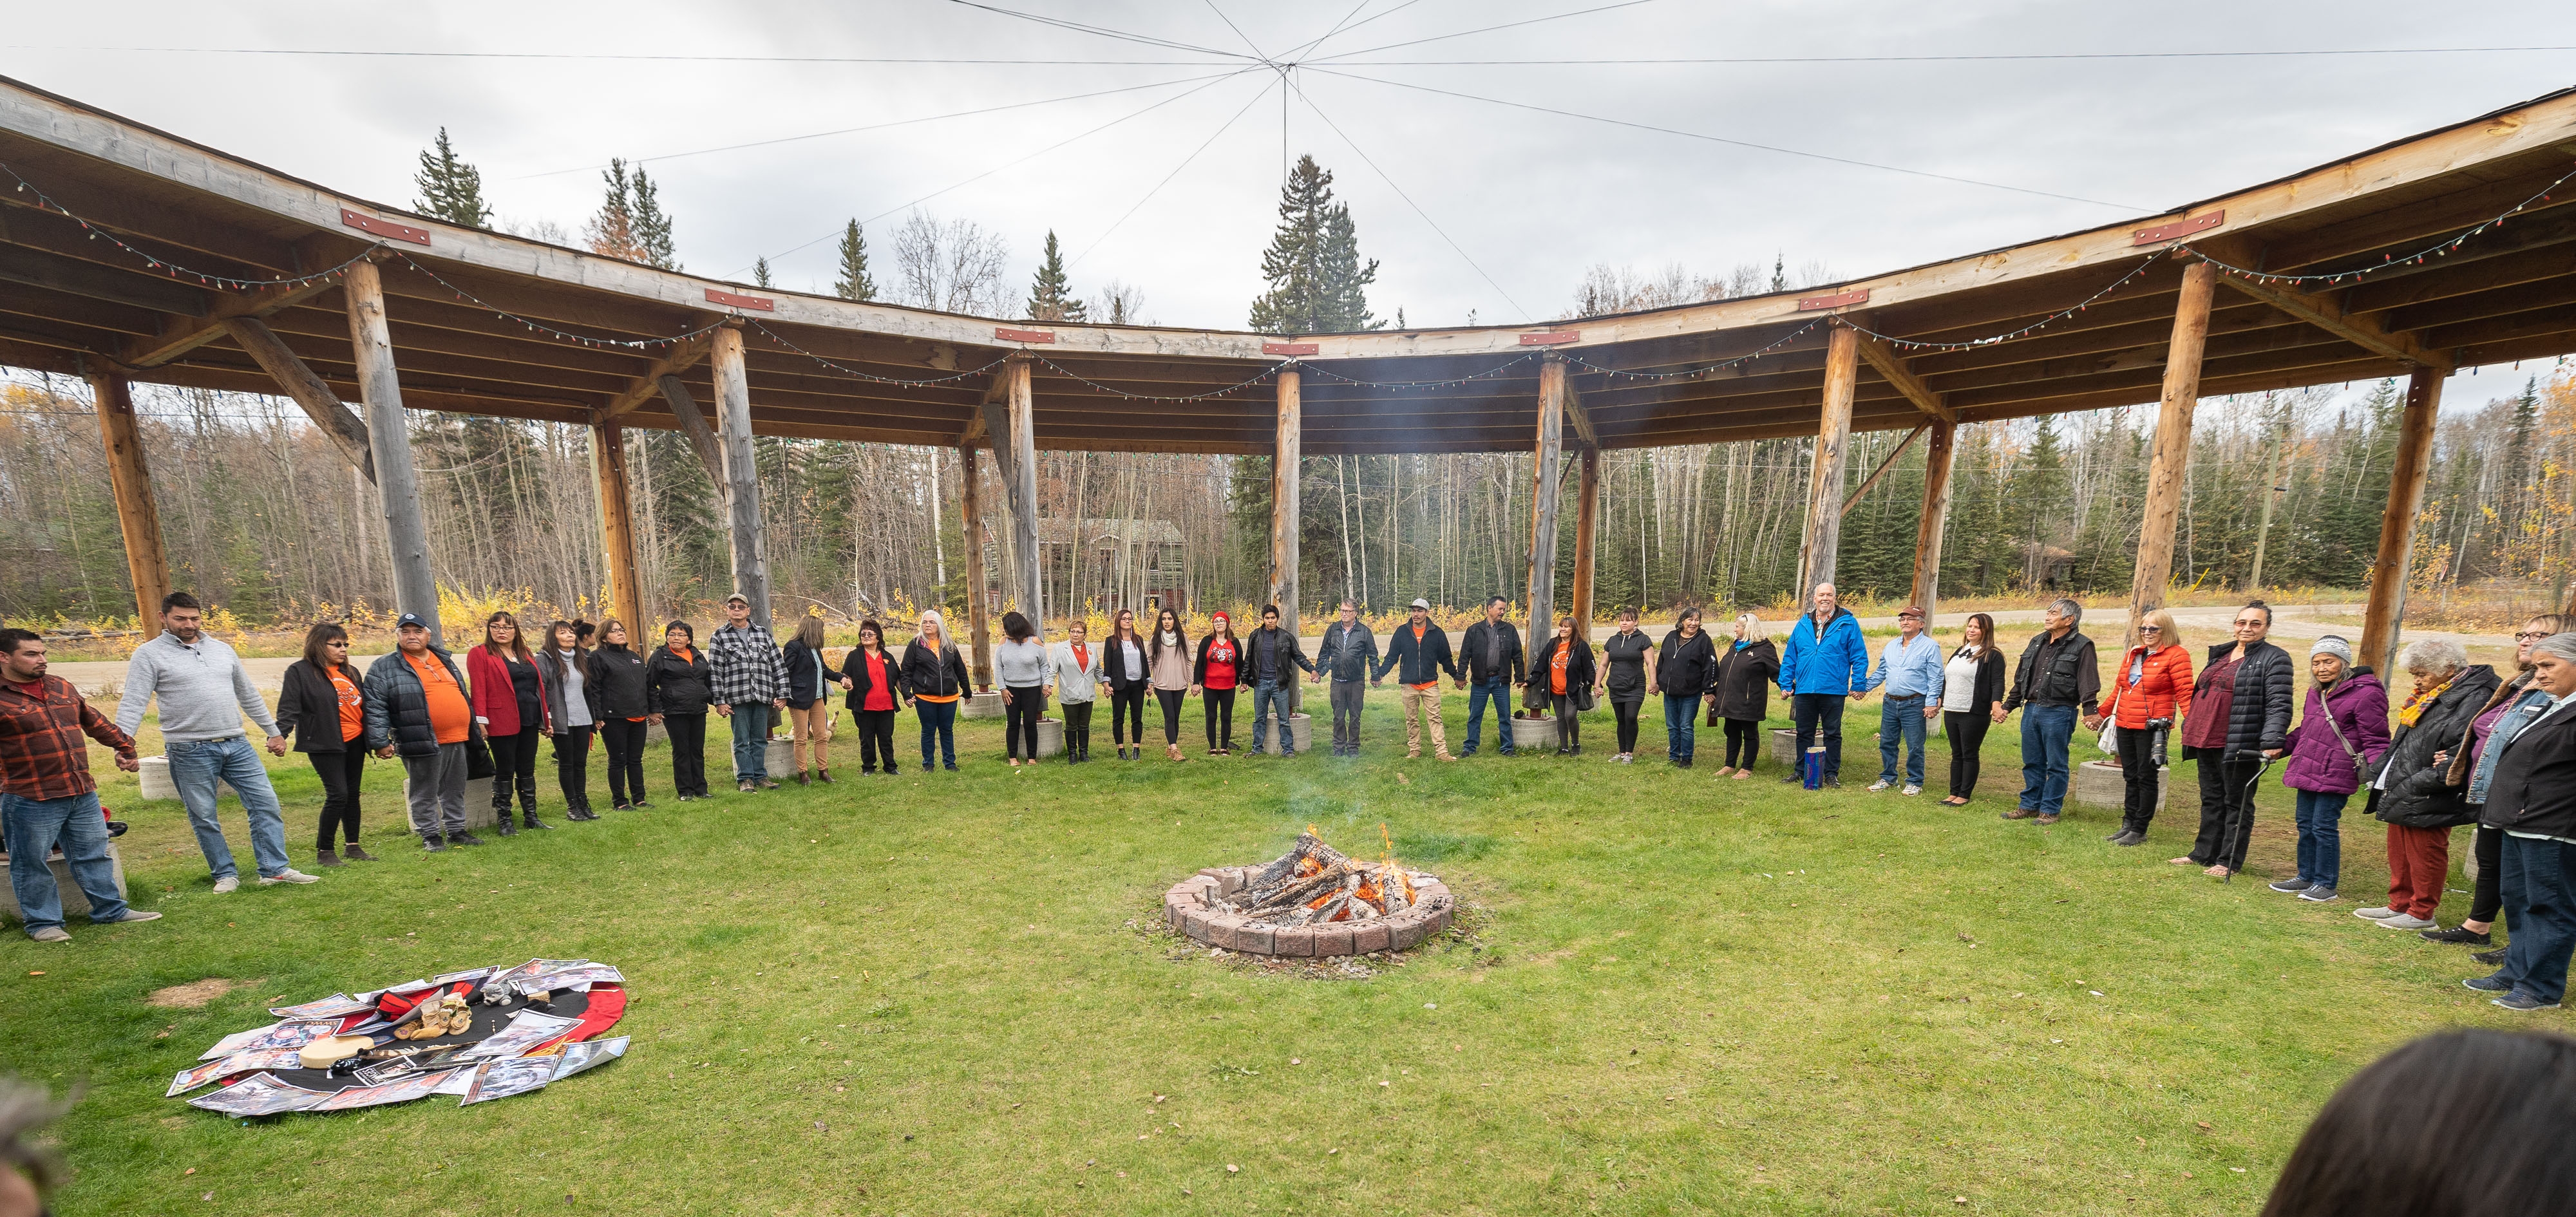 Premier Travels to Lower Post to Meet with First Nations, Visits Former Residential School